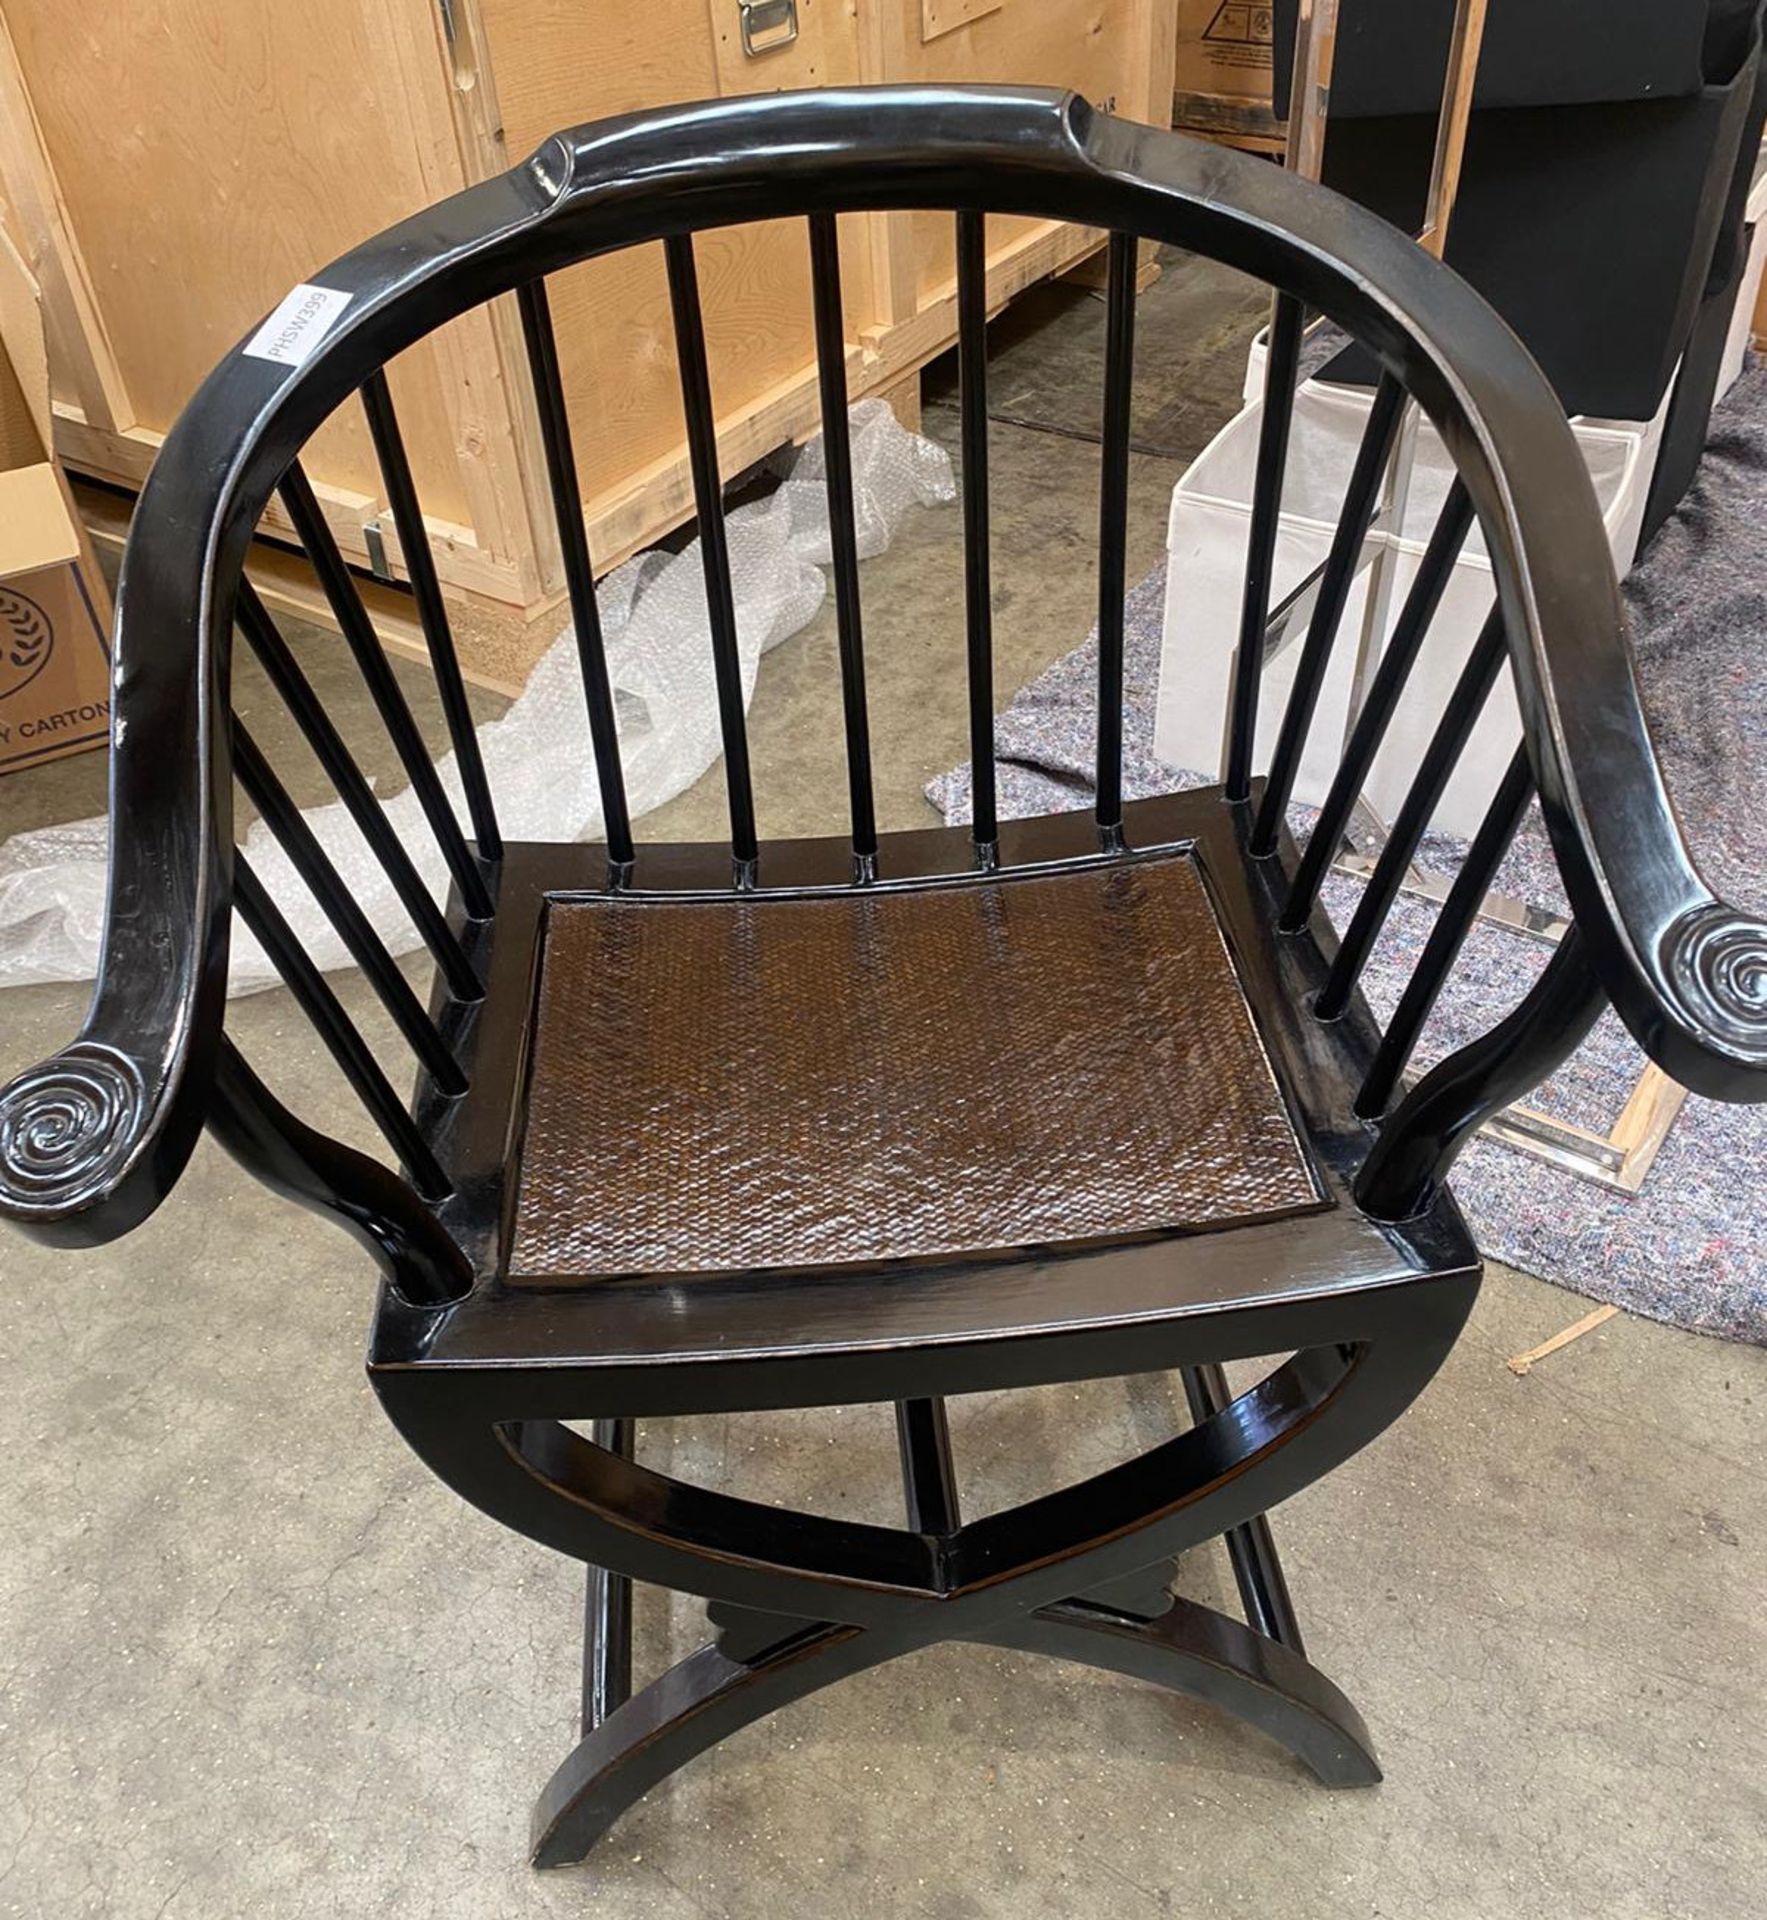 1 x Round back Occasional Mahogany Chair With Seat Pad and Crossed Legs - Image 3 of 3